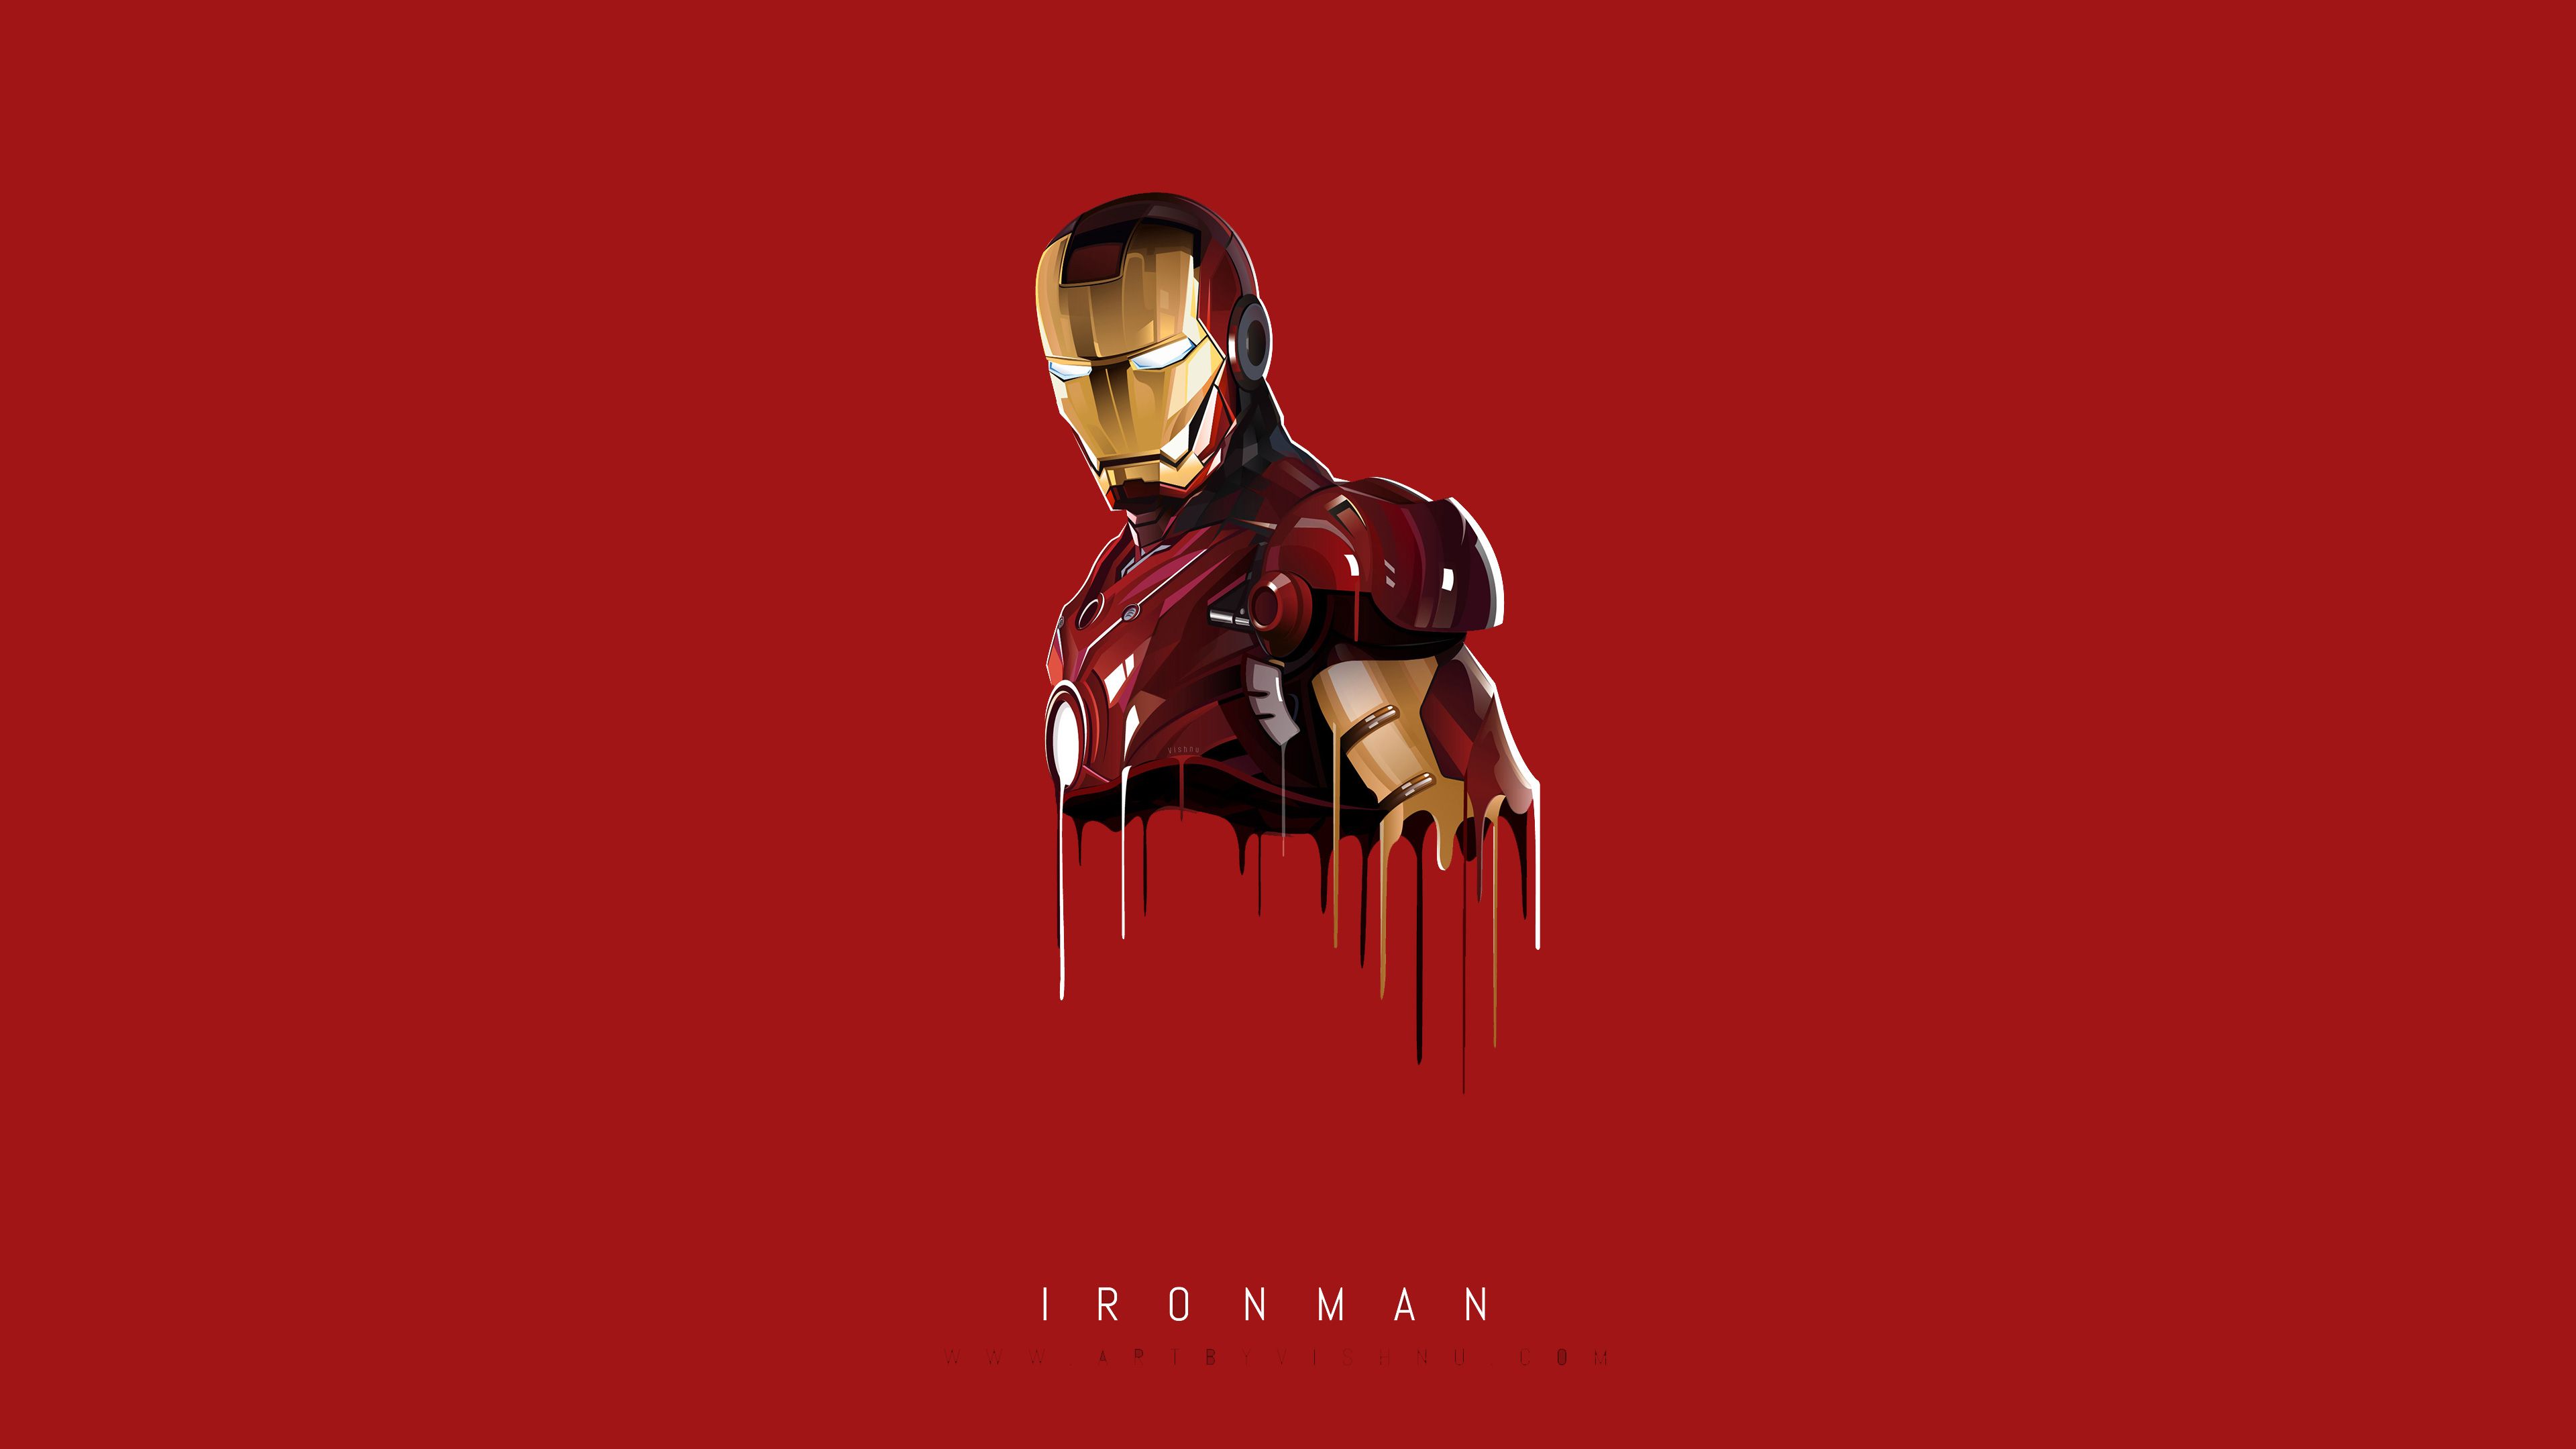 Iron Man Minimalist Wallpapers posted by Sarah Sellers.